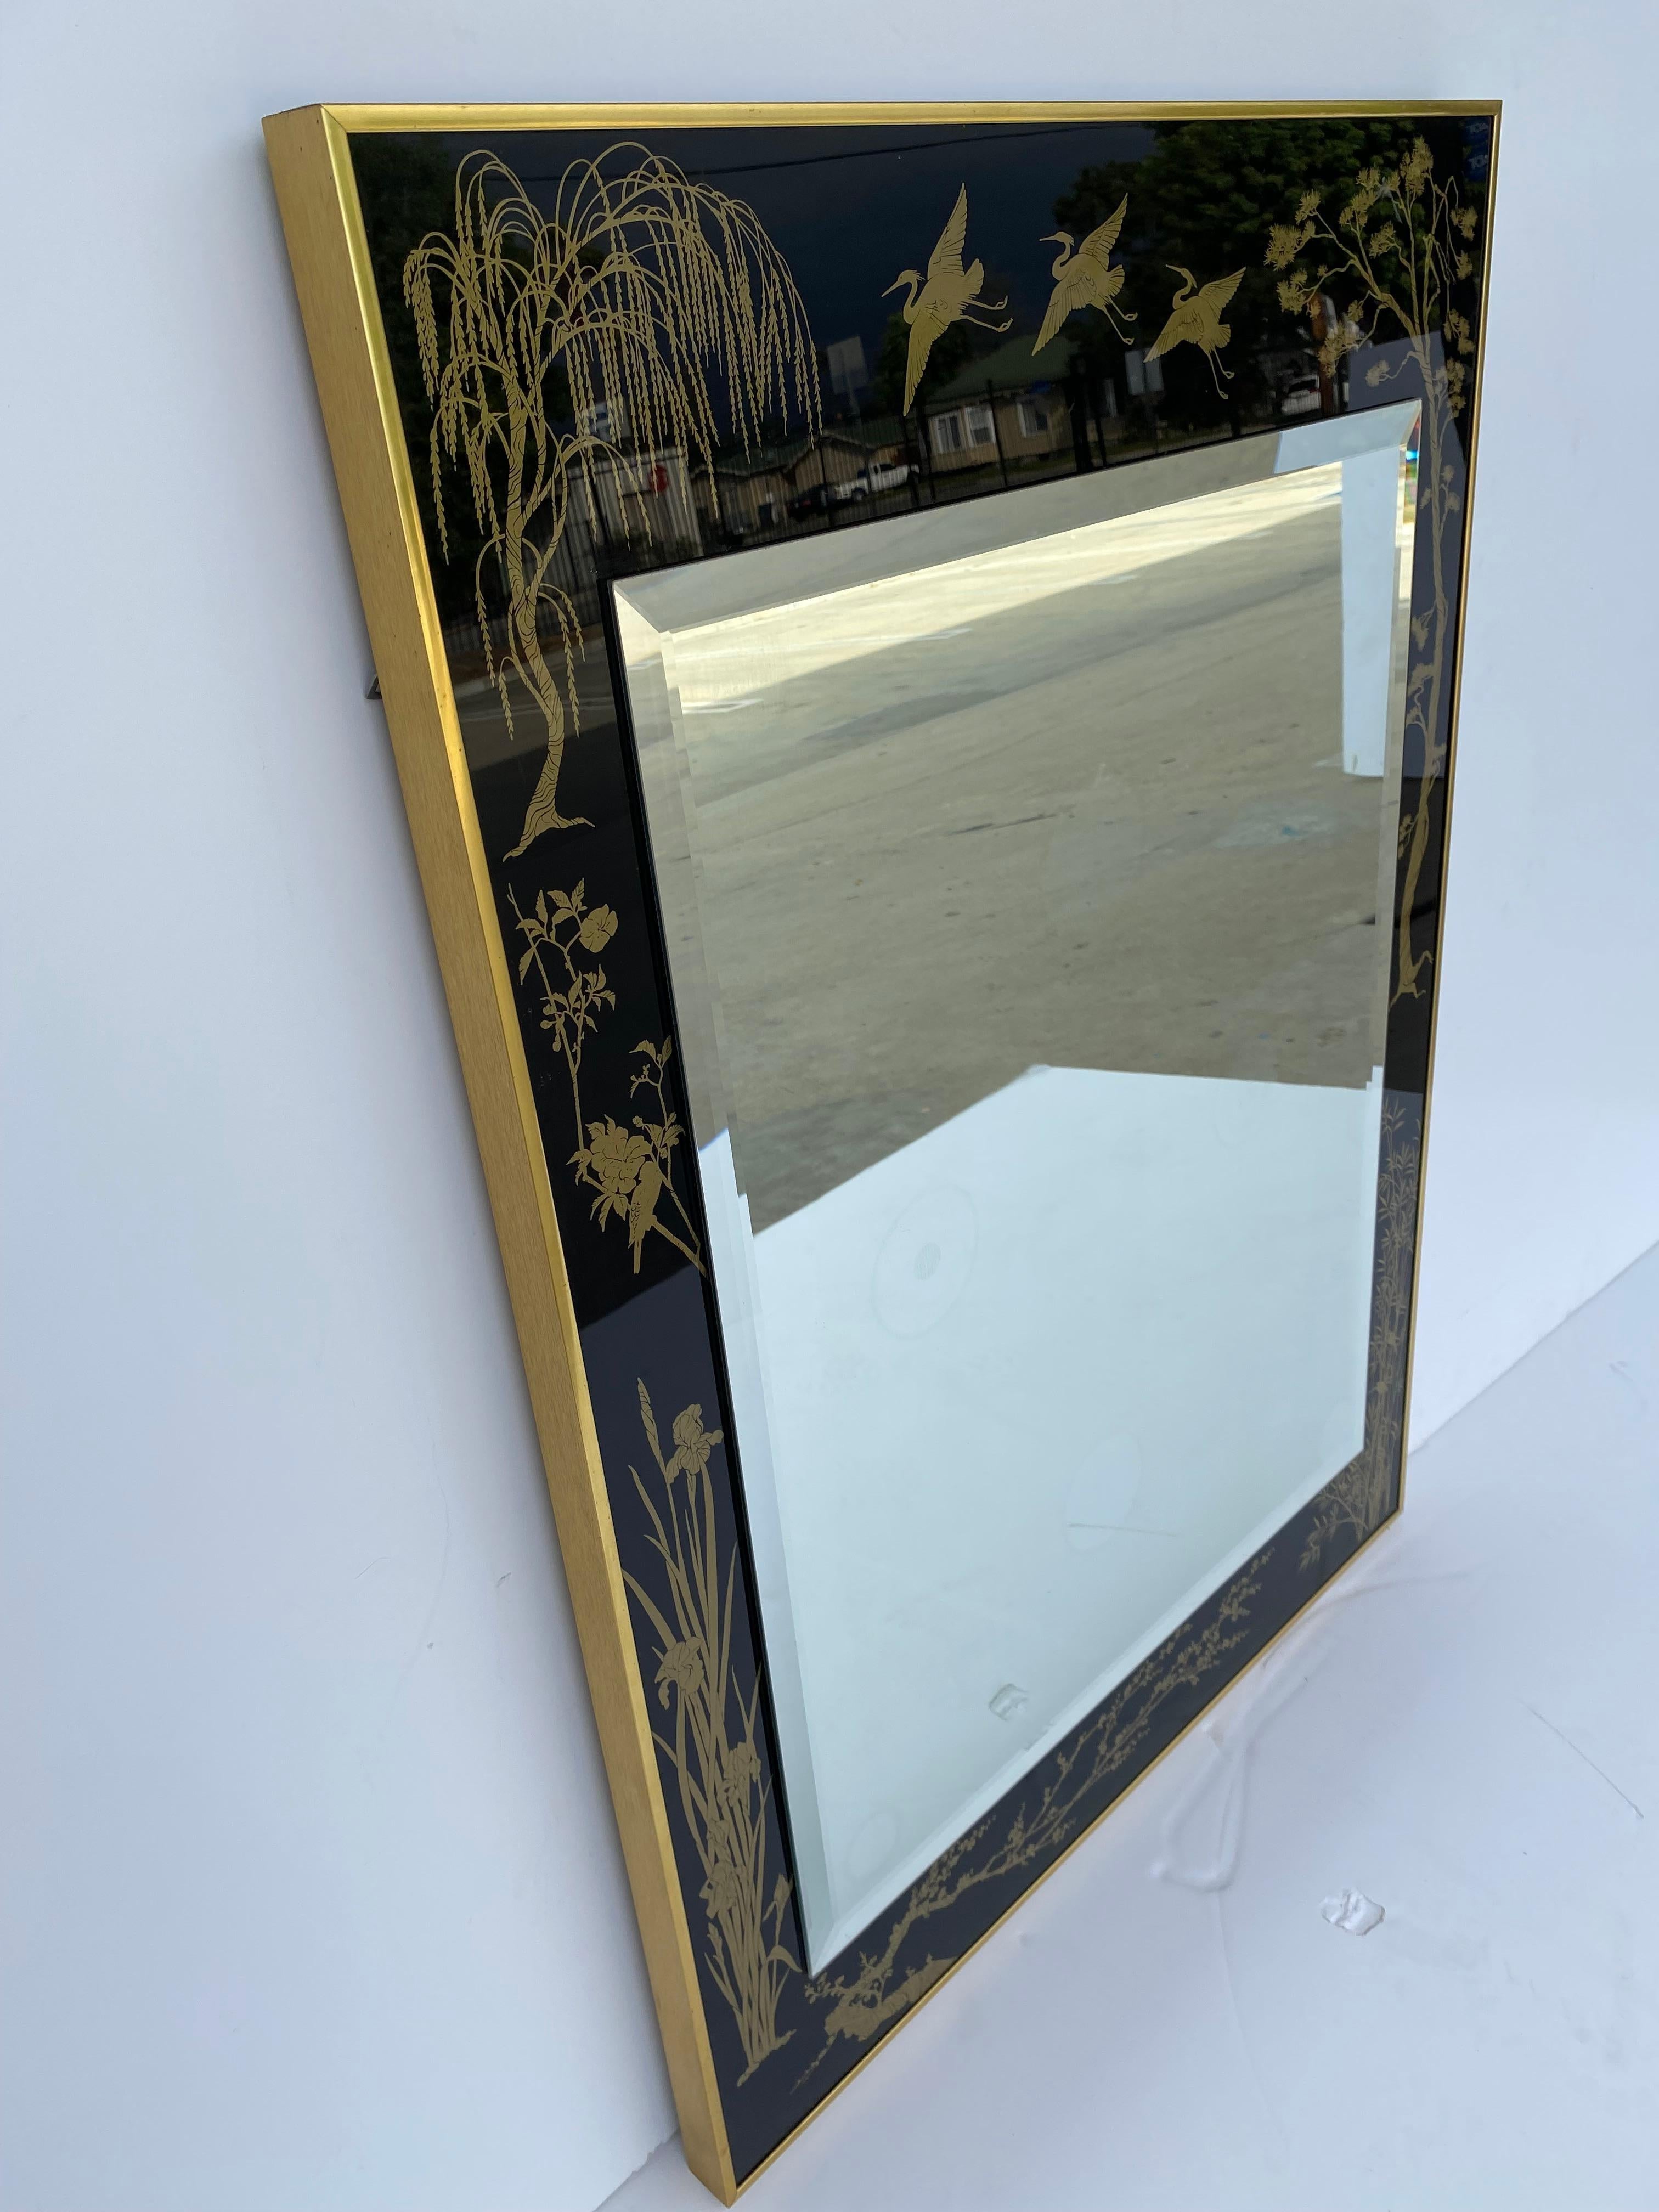 Black glass with a chinoiserie gold pattern of birds and trees with a mirror in the center.